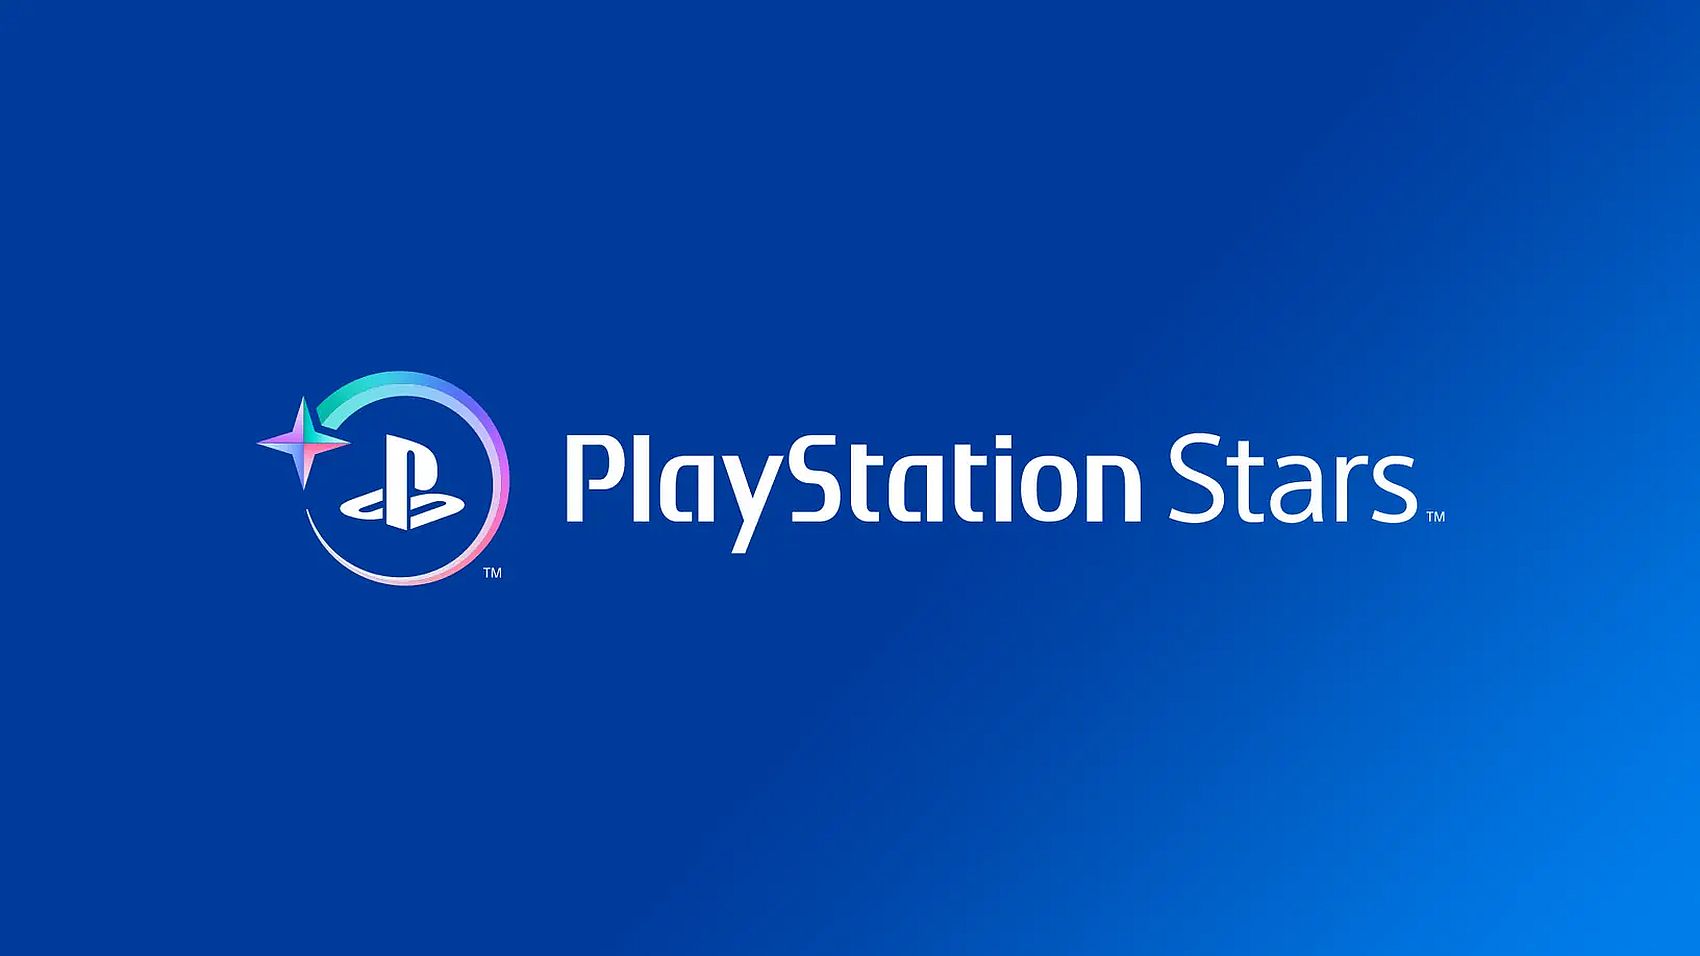 PlayStation Stars apparently gives "priority" customer support to top members